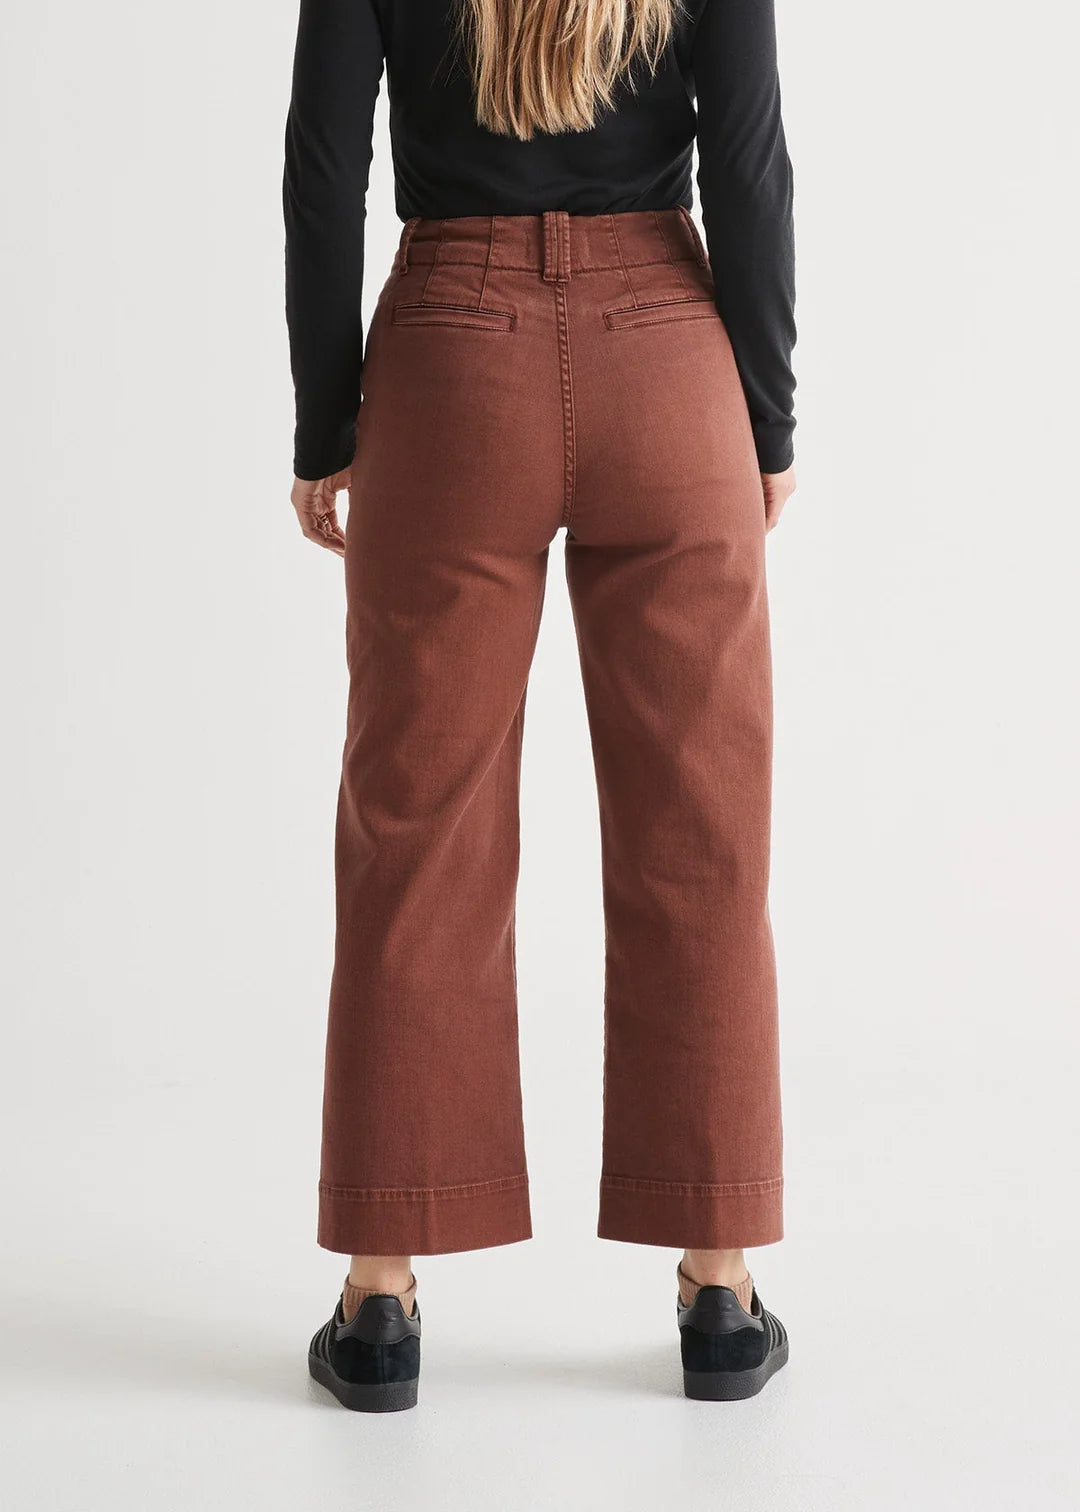 LUXTWILL high rise trouser